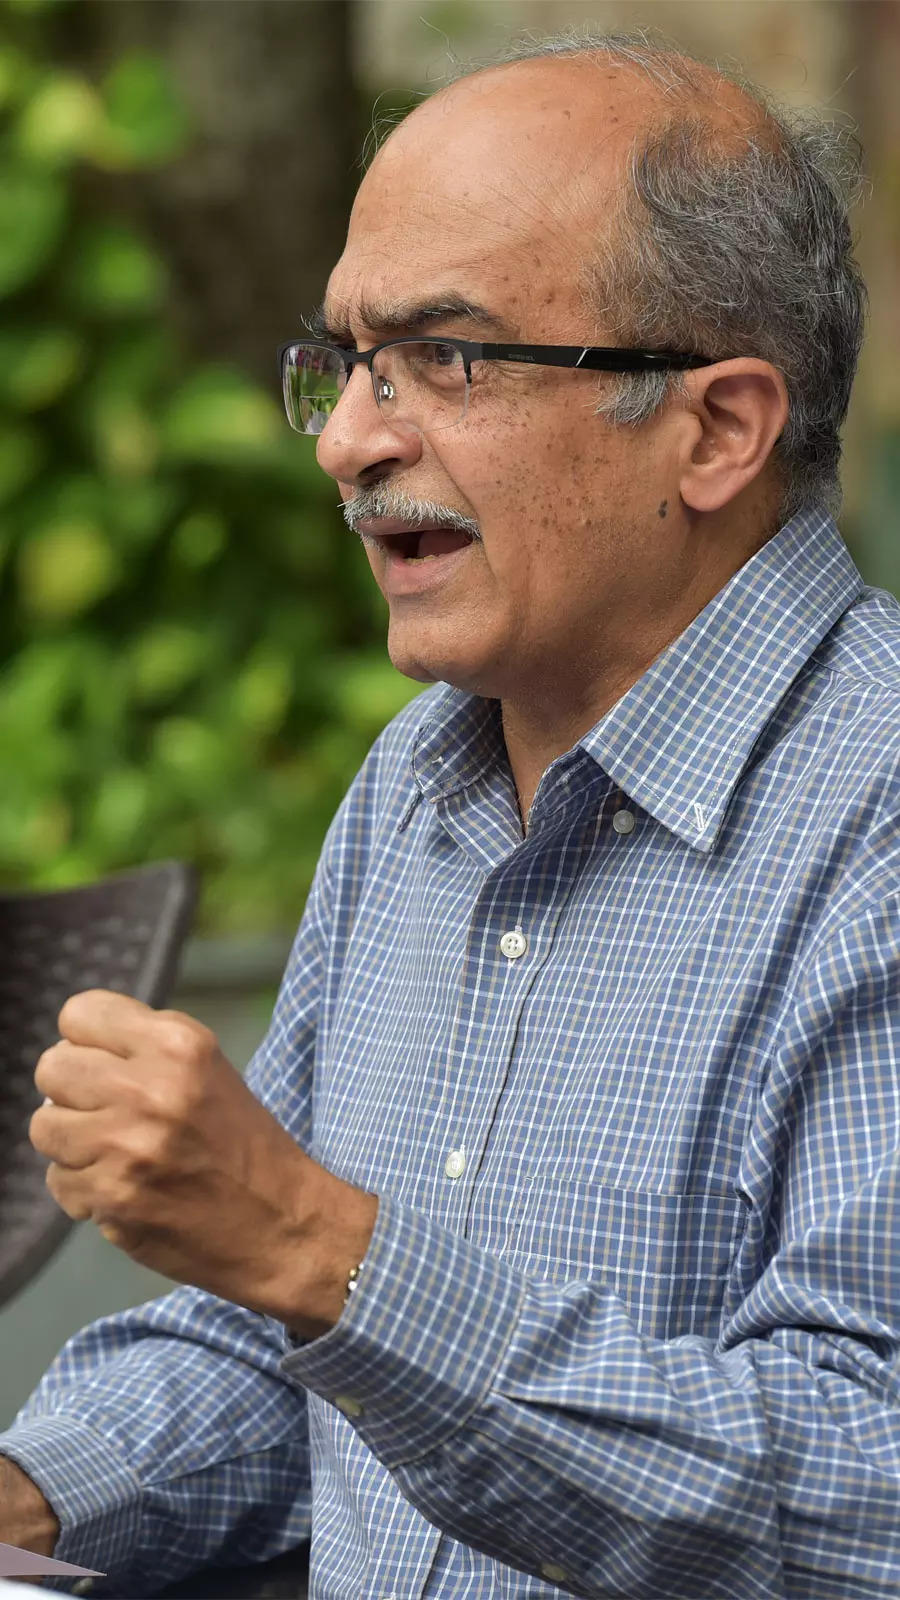 <p>Prashant Bhushan co-founded 'Common Cause,' a public interest advocacy group, in 1980. The organization focuses on issues related to transparency, accountability, and good governance in India.</p>